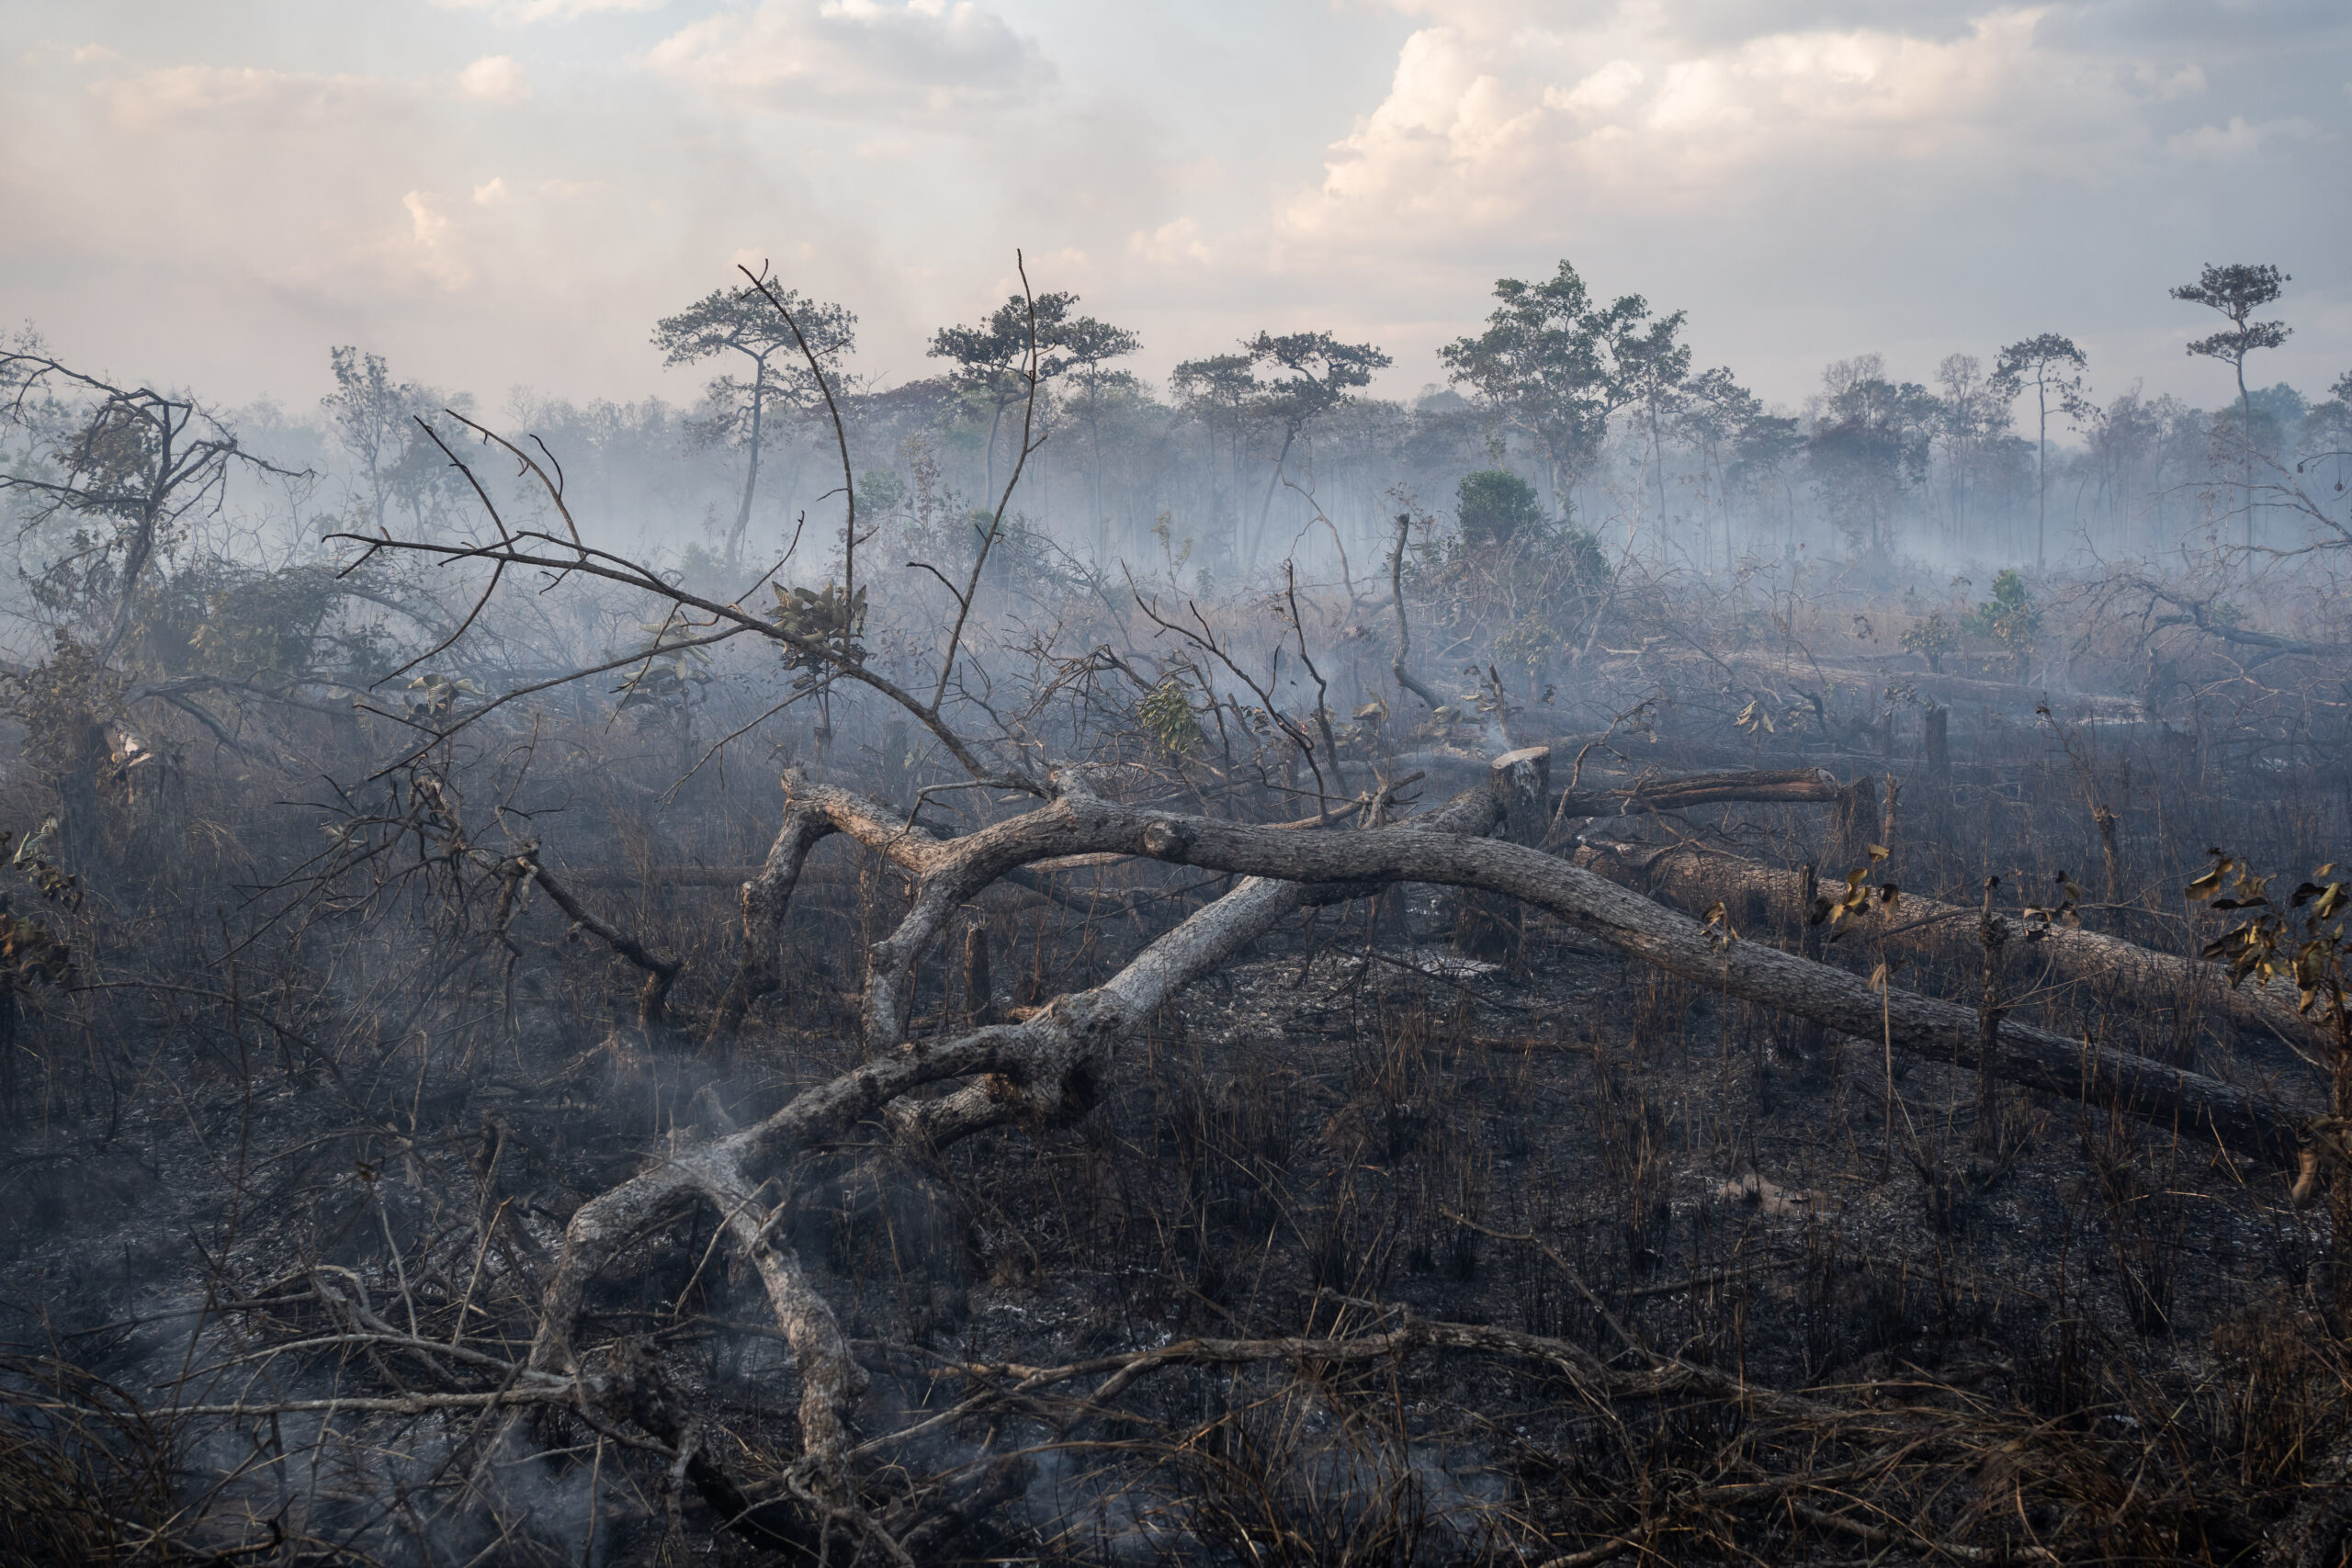 A section of forest burns inside an ELC that was awarded to Siemon Agriculture Comprehensive Development in Stung Treng province. The road from which this photo was taken is lined with ELCs and leads directly to the TSMW concession, which was issued in 2022 - 10 years after the government's ban on new ELCs being awarded. Image by Andy Ball / Mongabay.